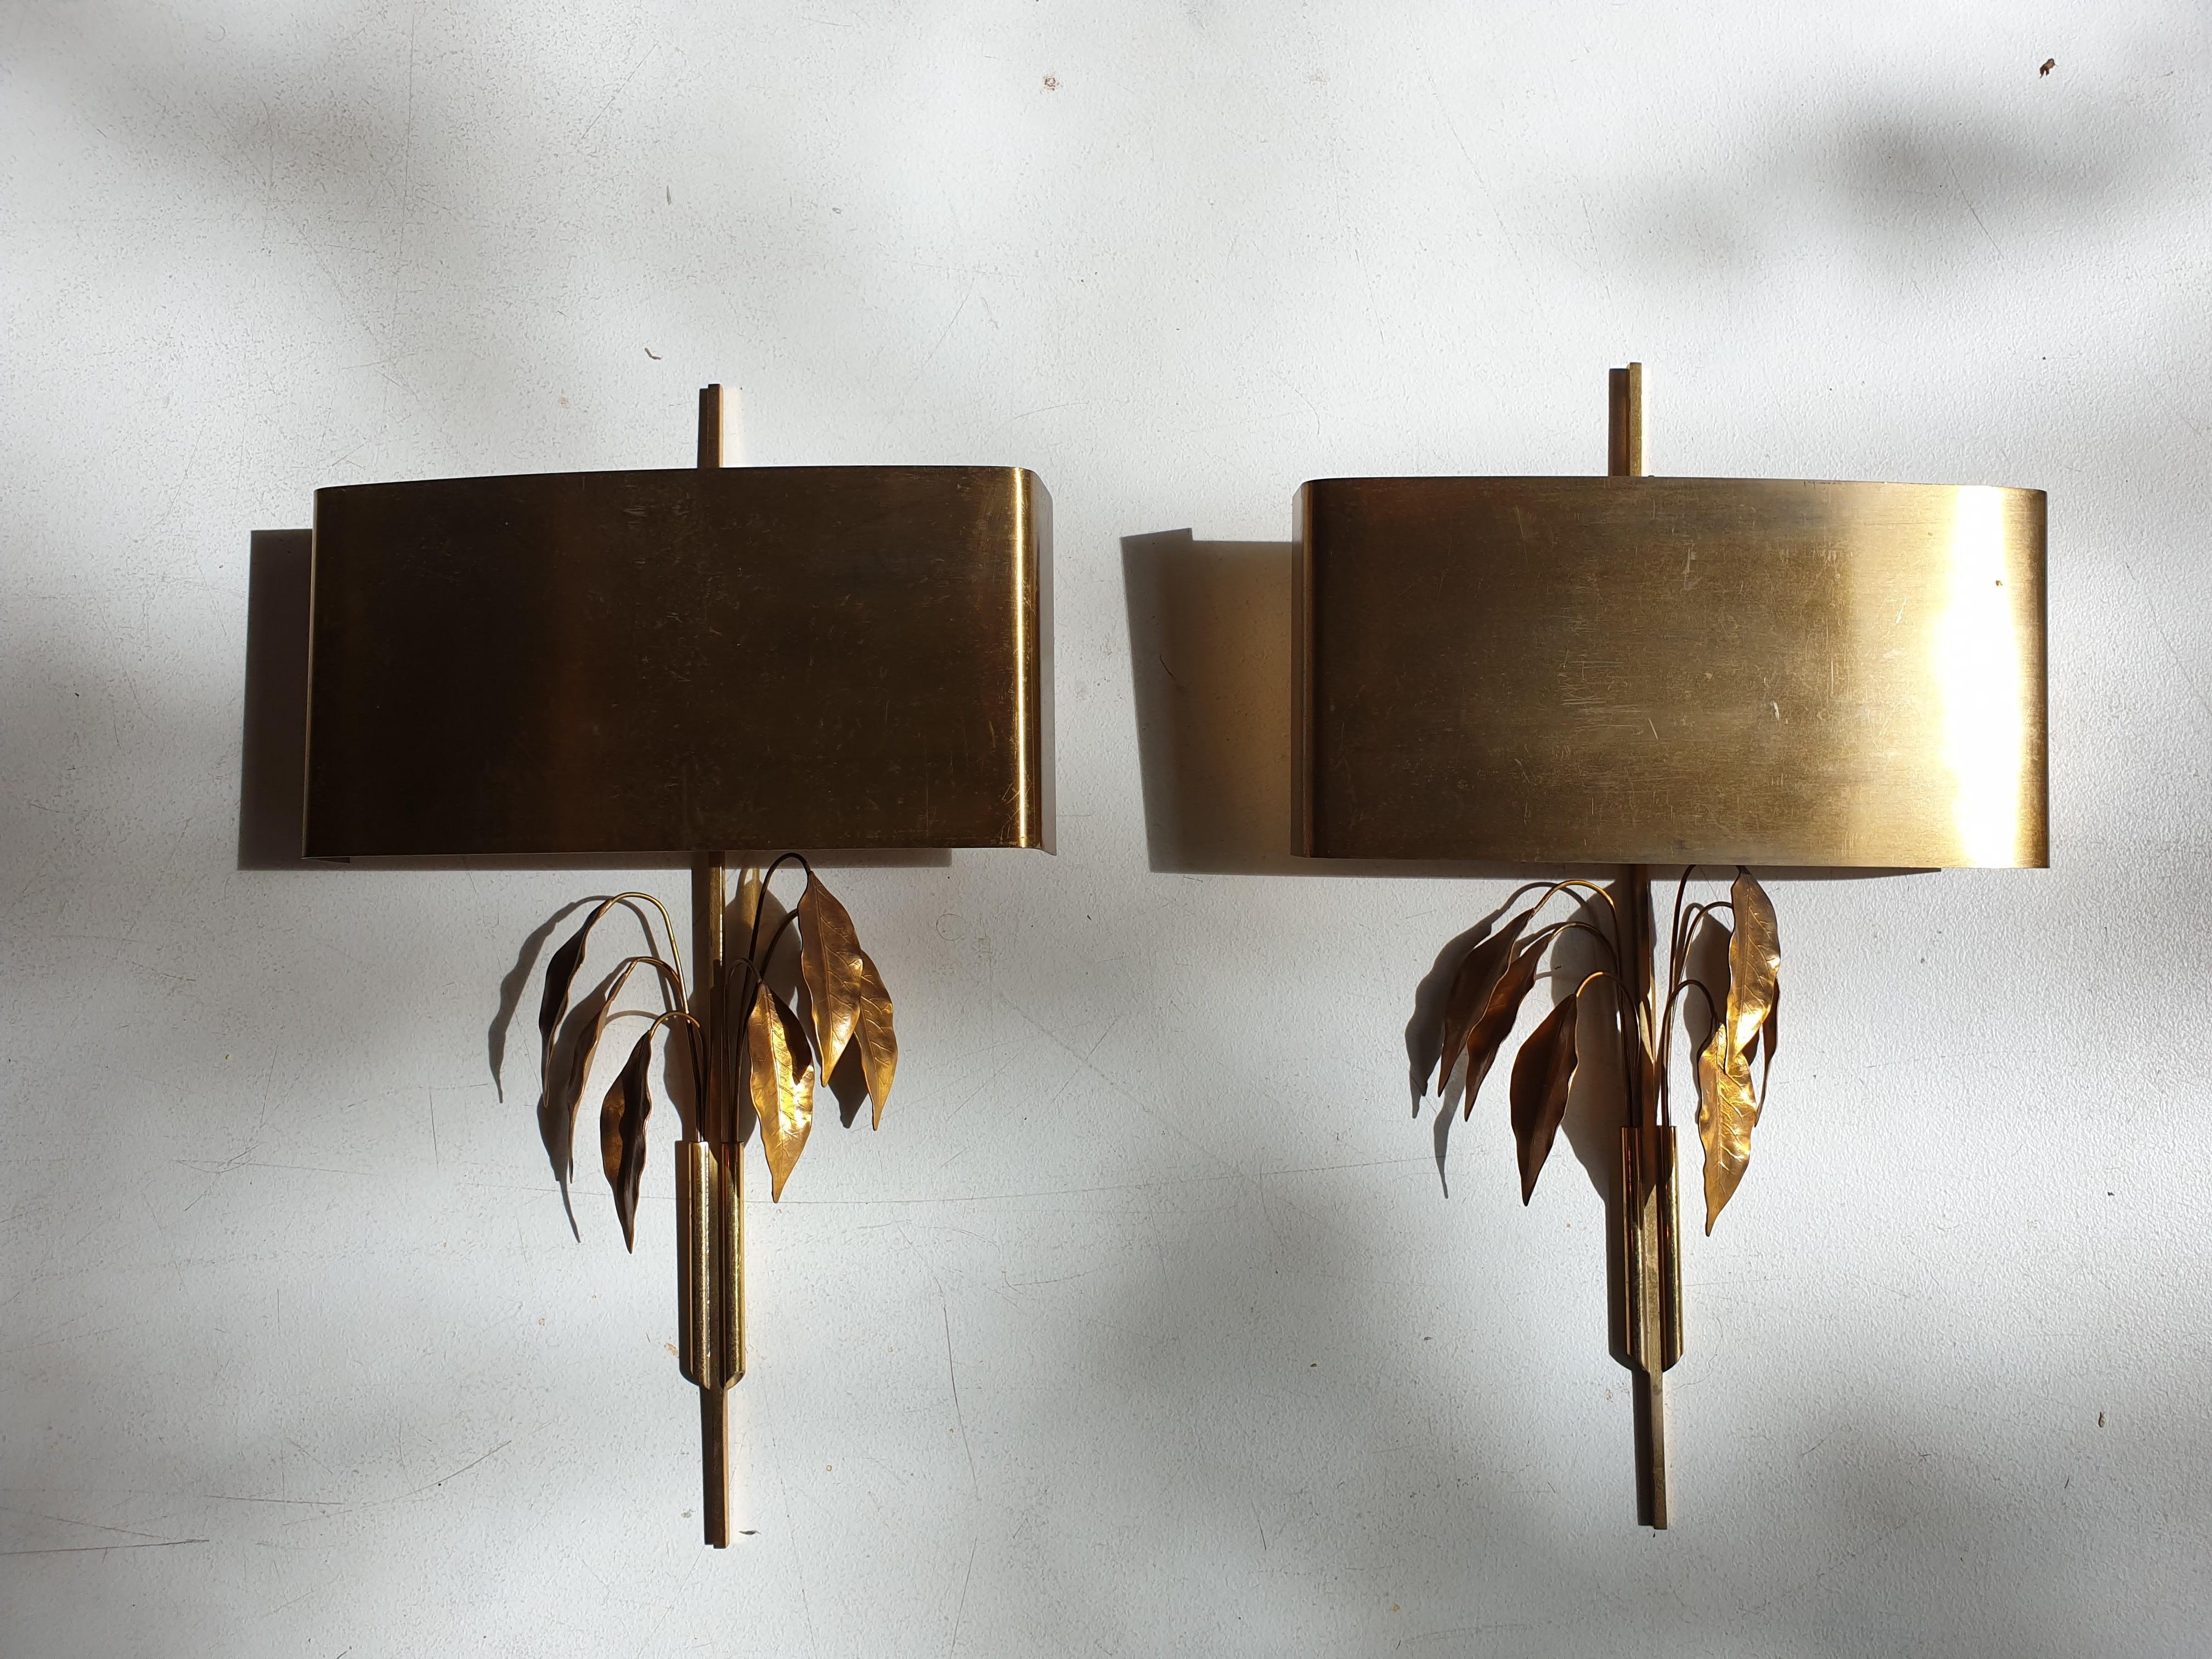 Pair of French lacquered brass wall lights with brass shades and stems adorned with delicate sprays of leaves.